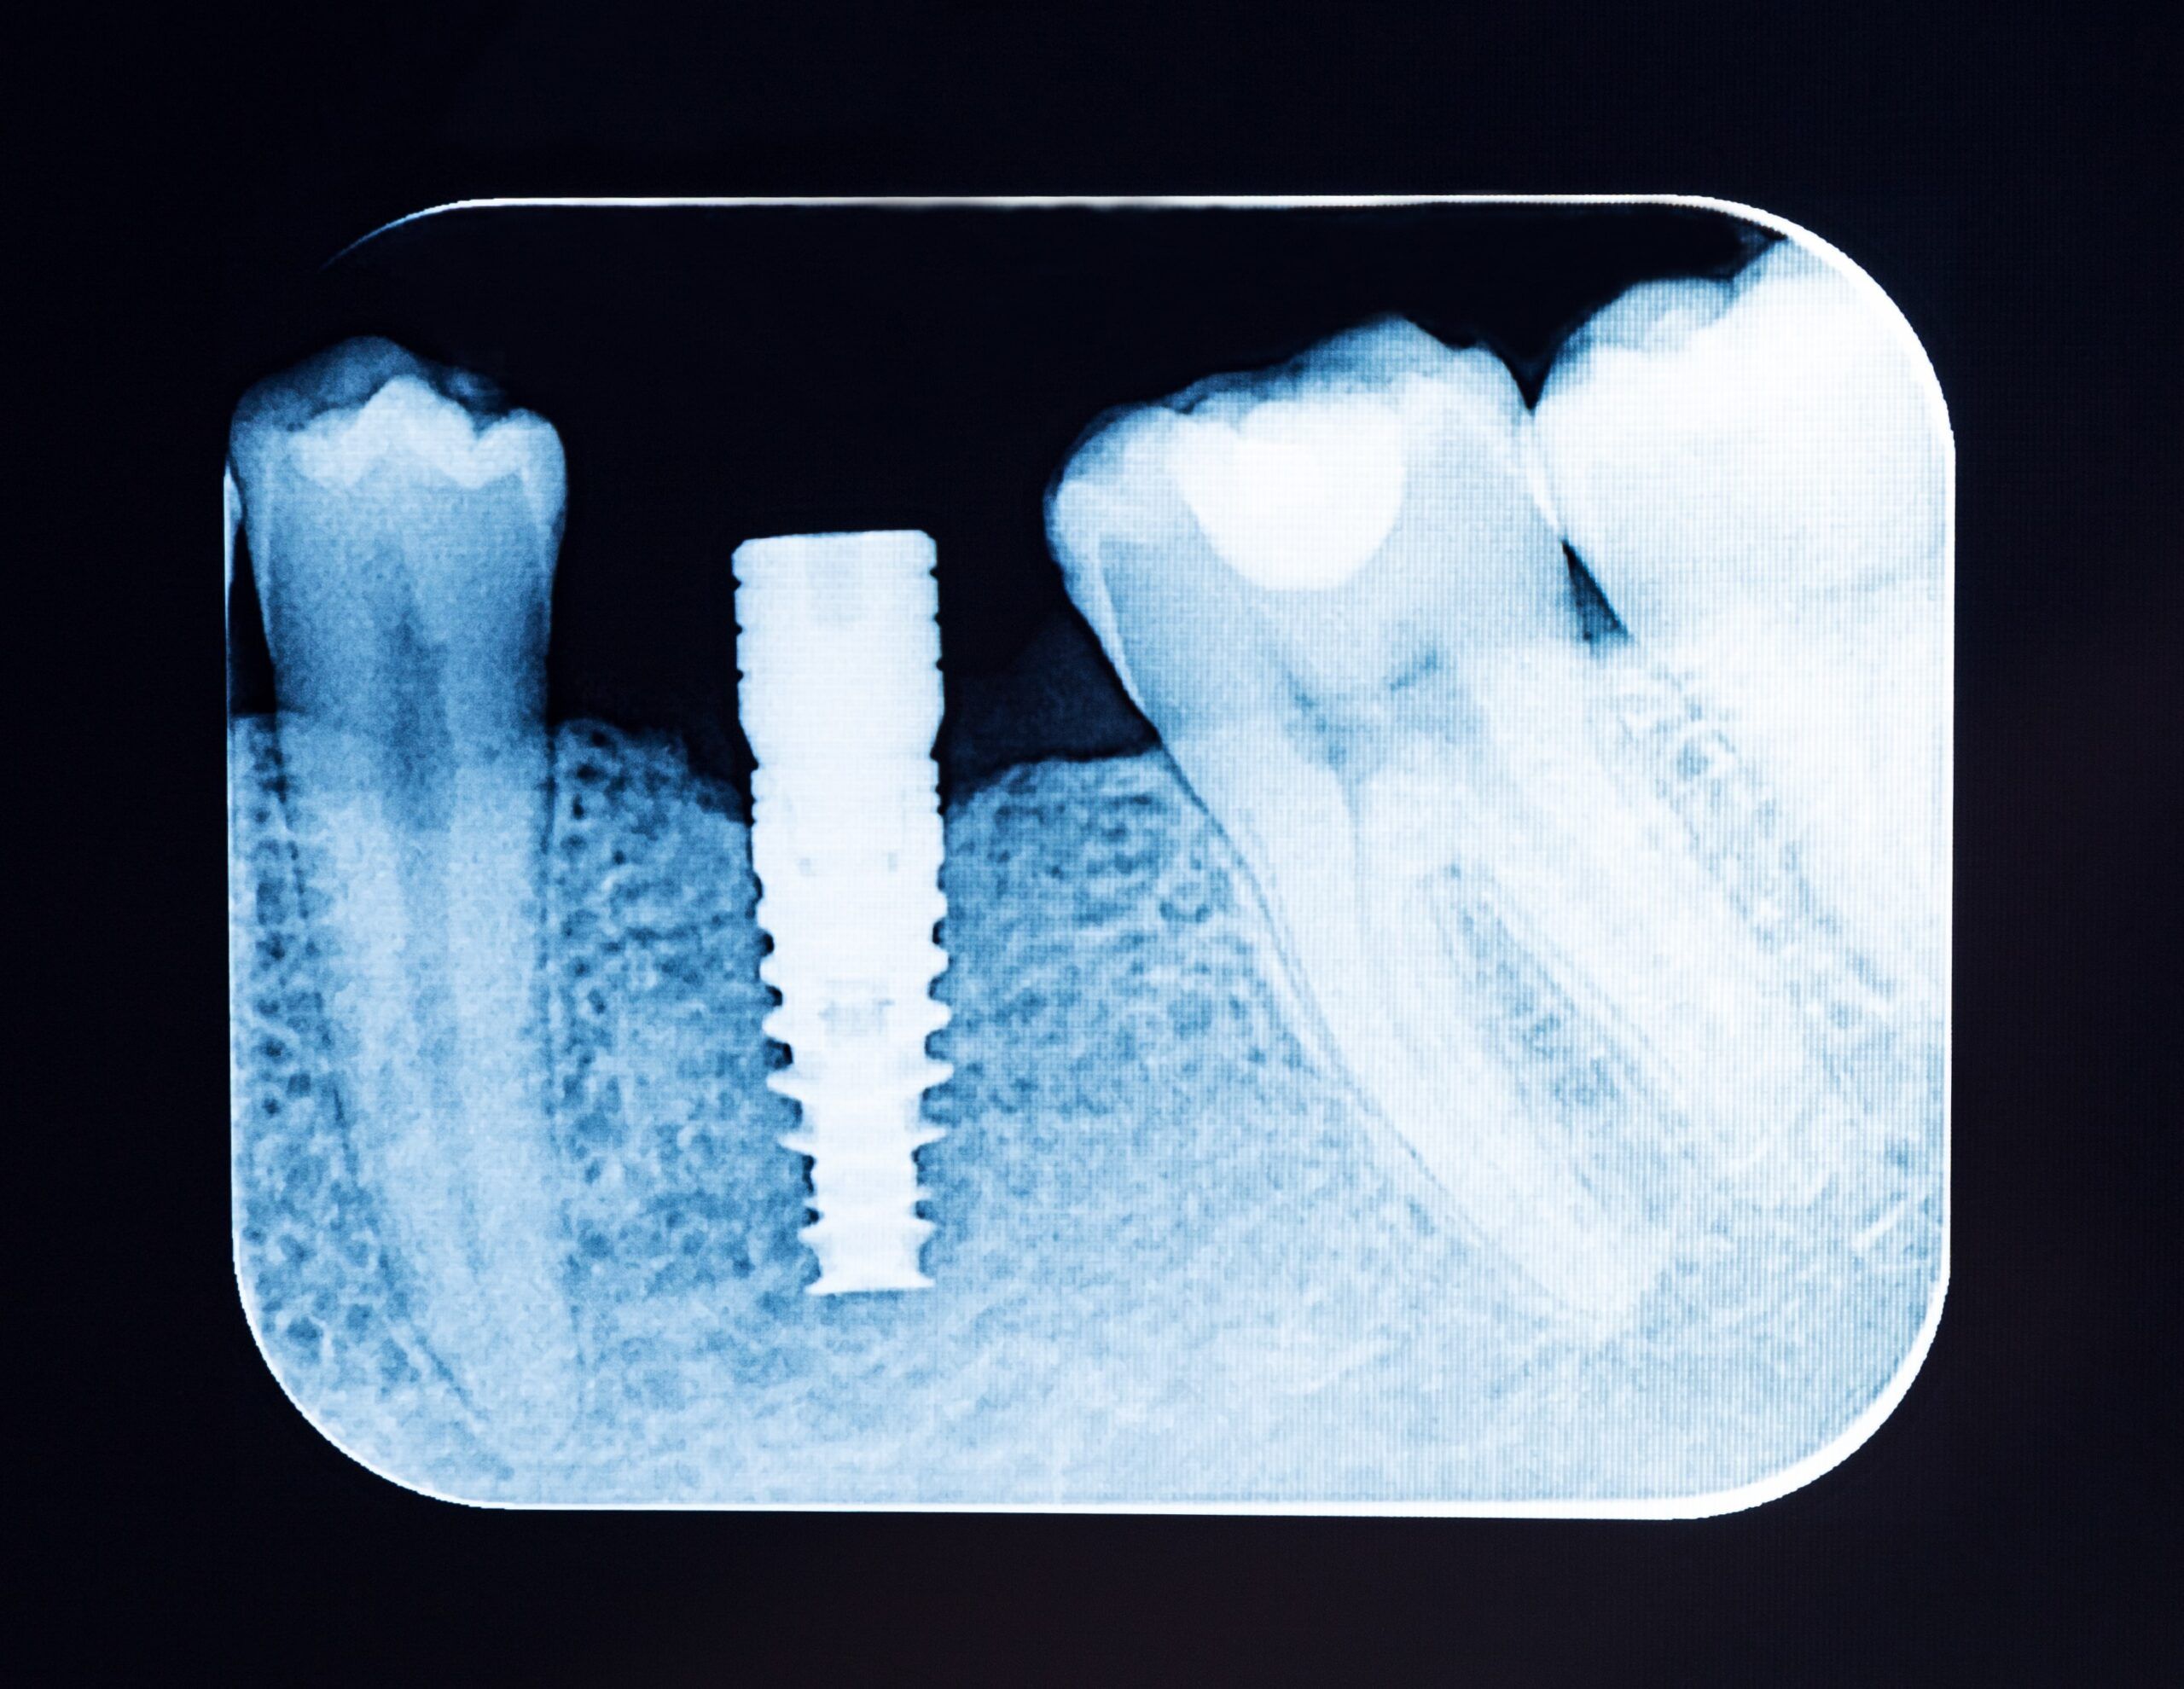 periapical dental x-ray with dental implant